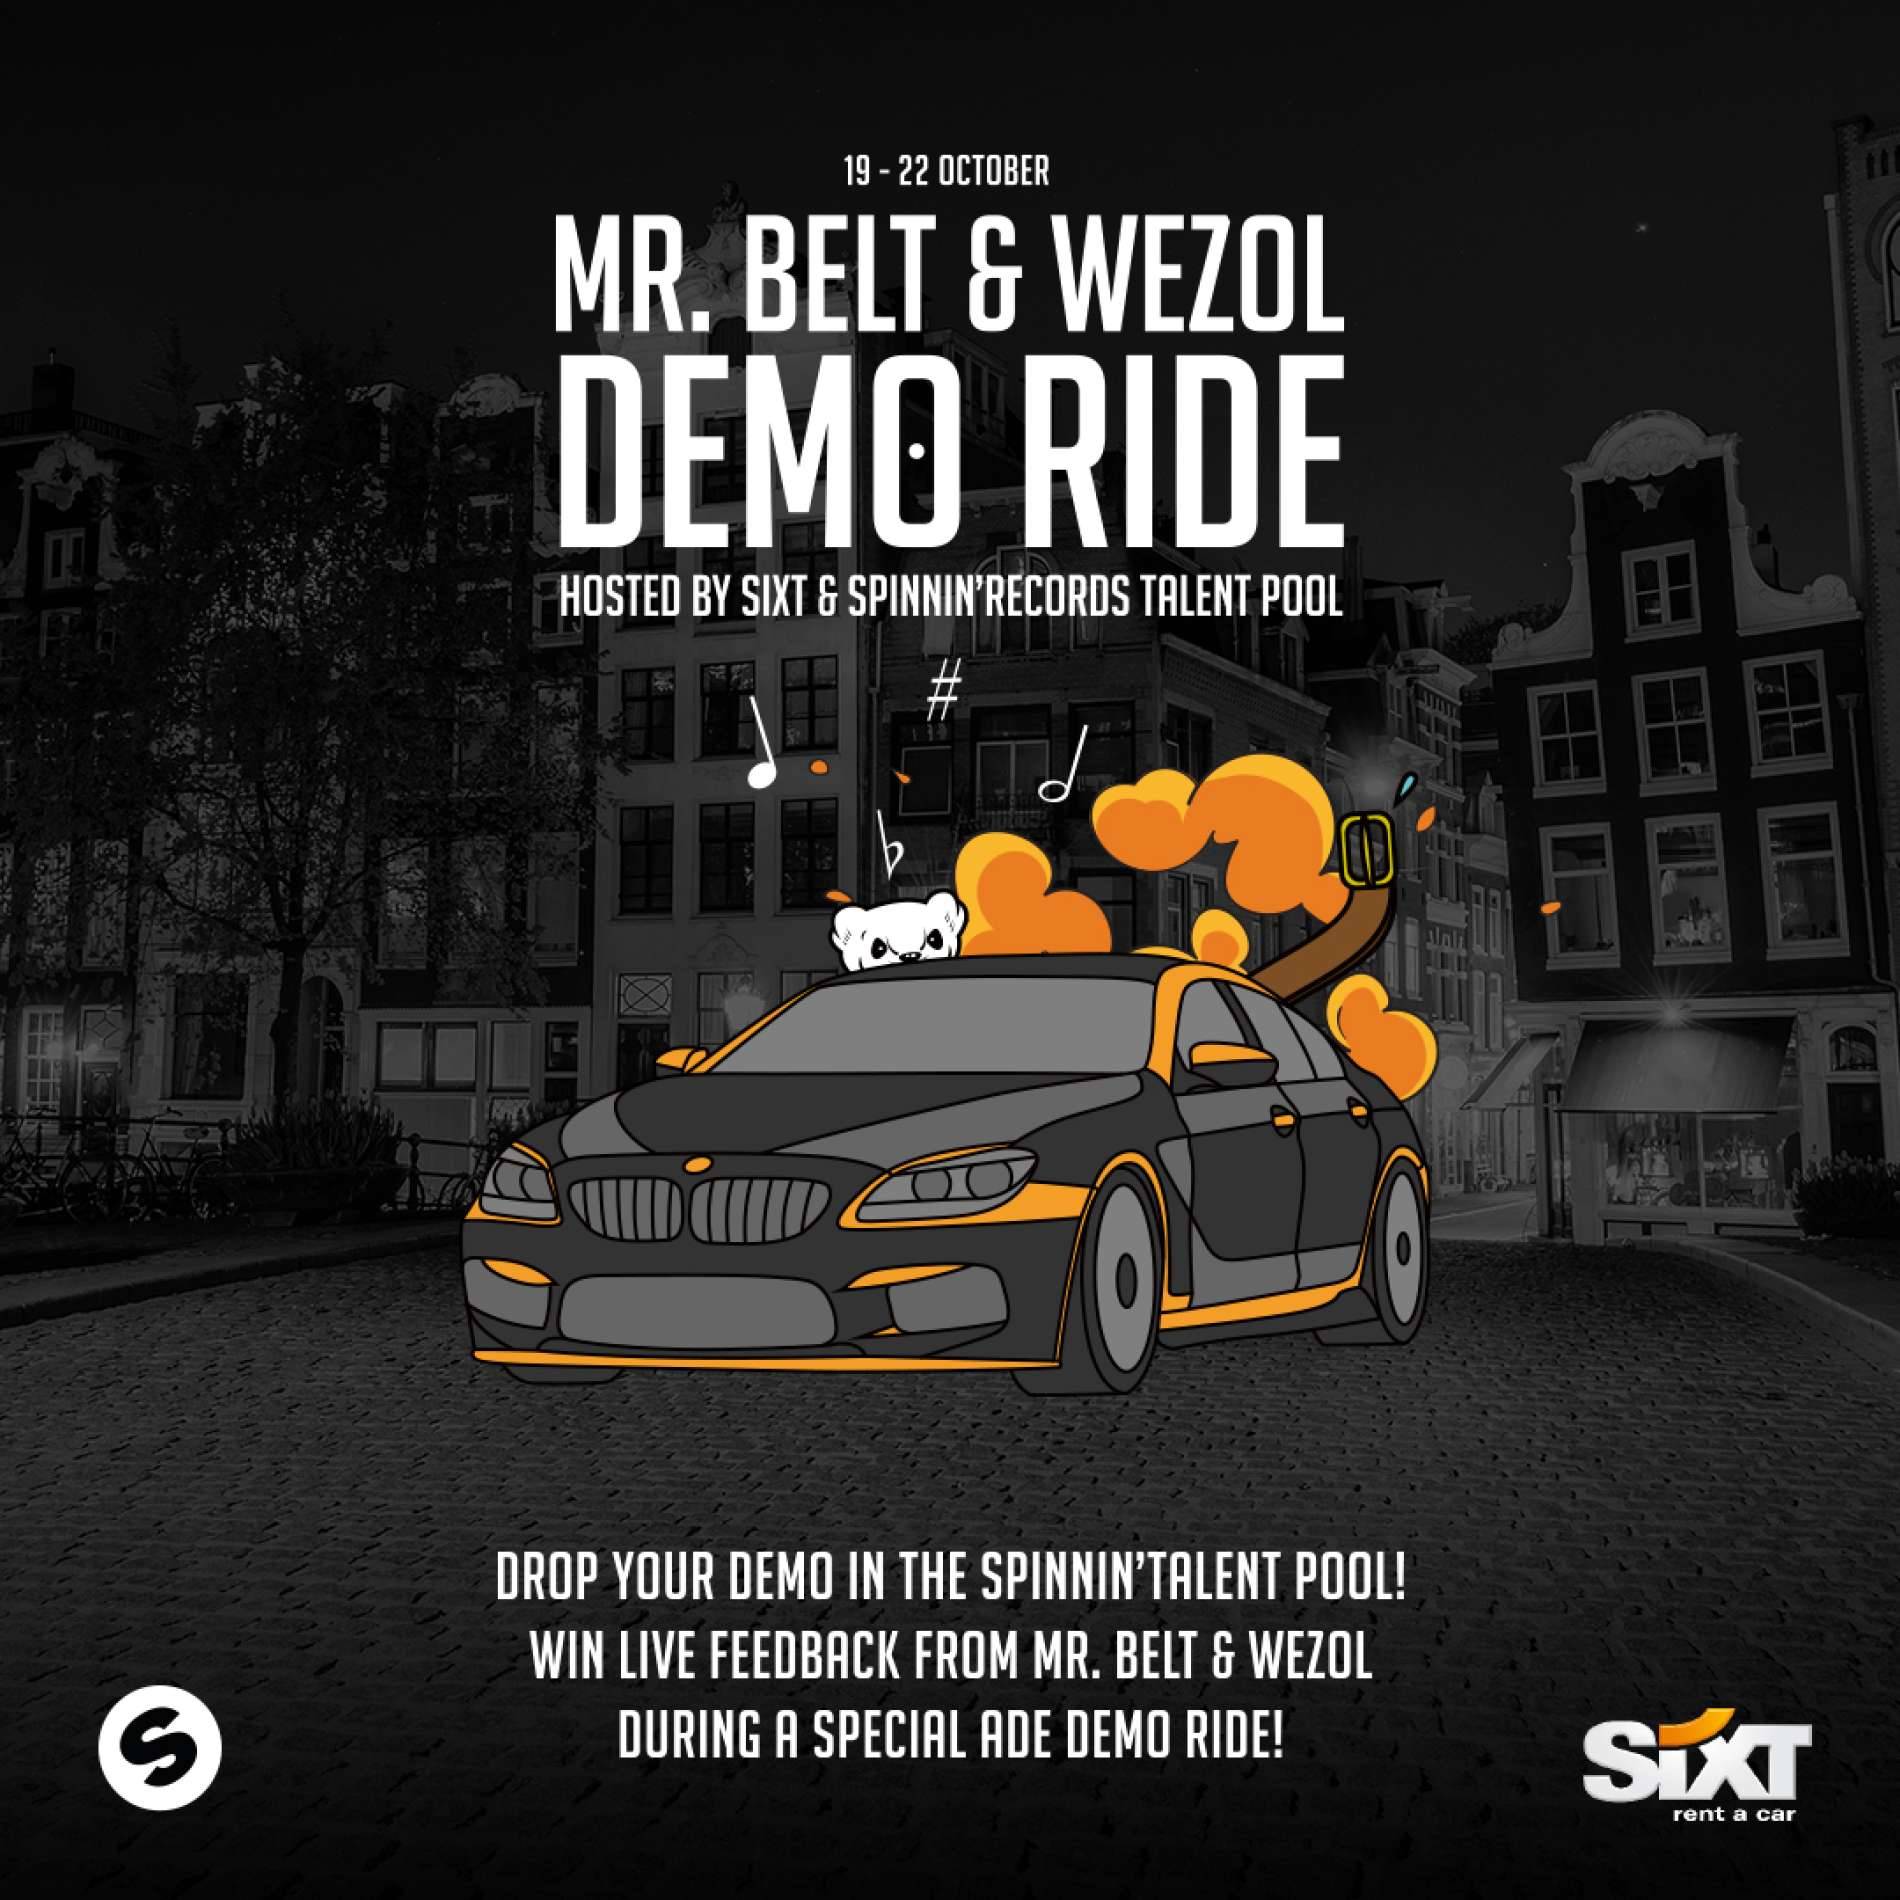 Take a Demo Ride with Mr. Belt & Wezol